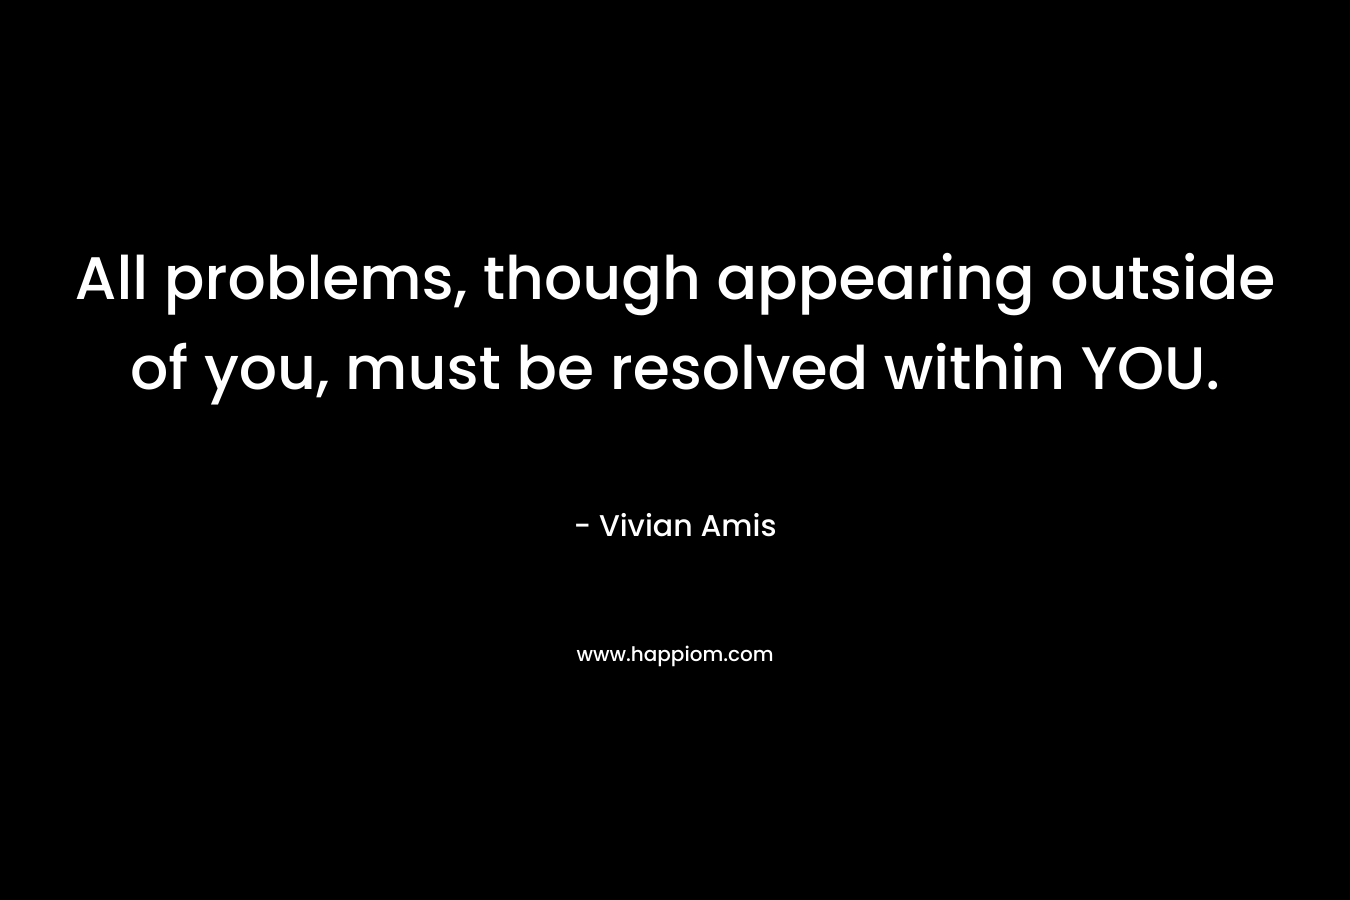 All problems, though appearing outside of you, must be resolved within YOU.